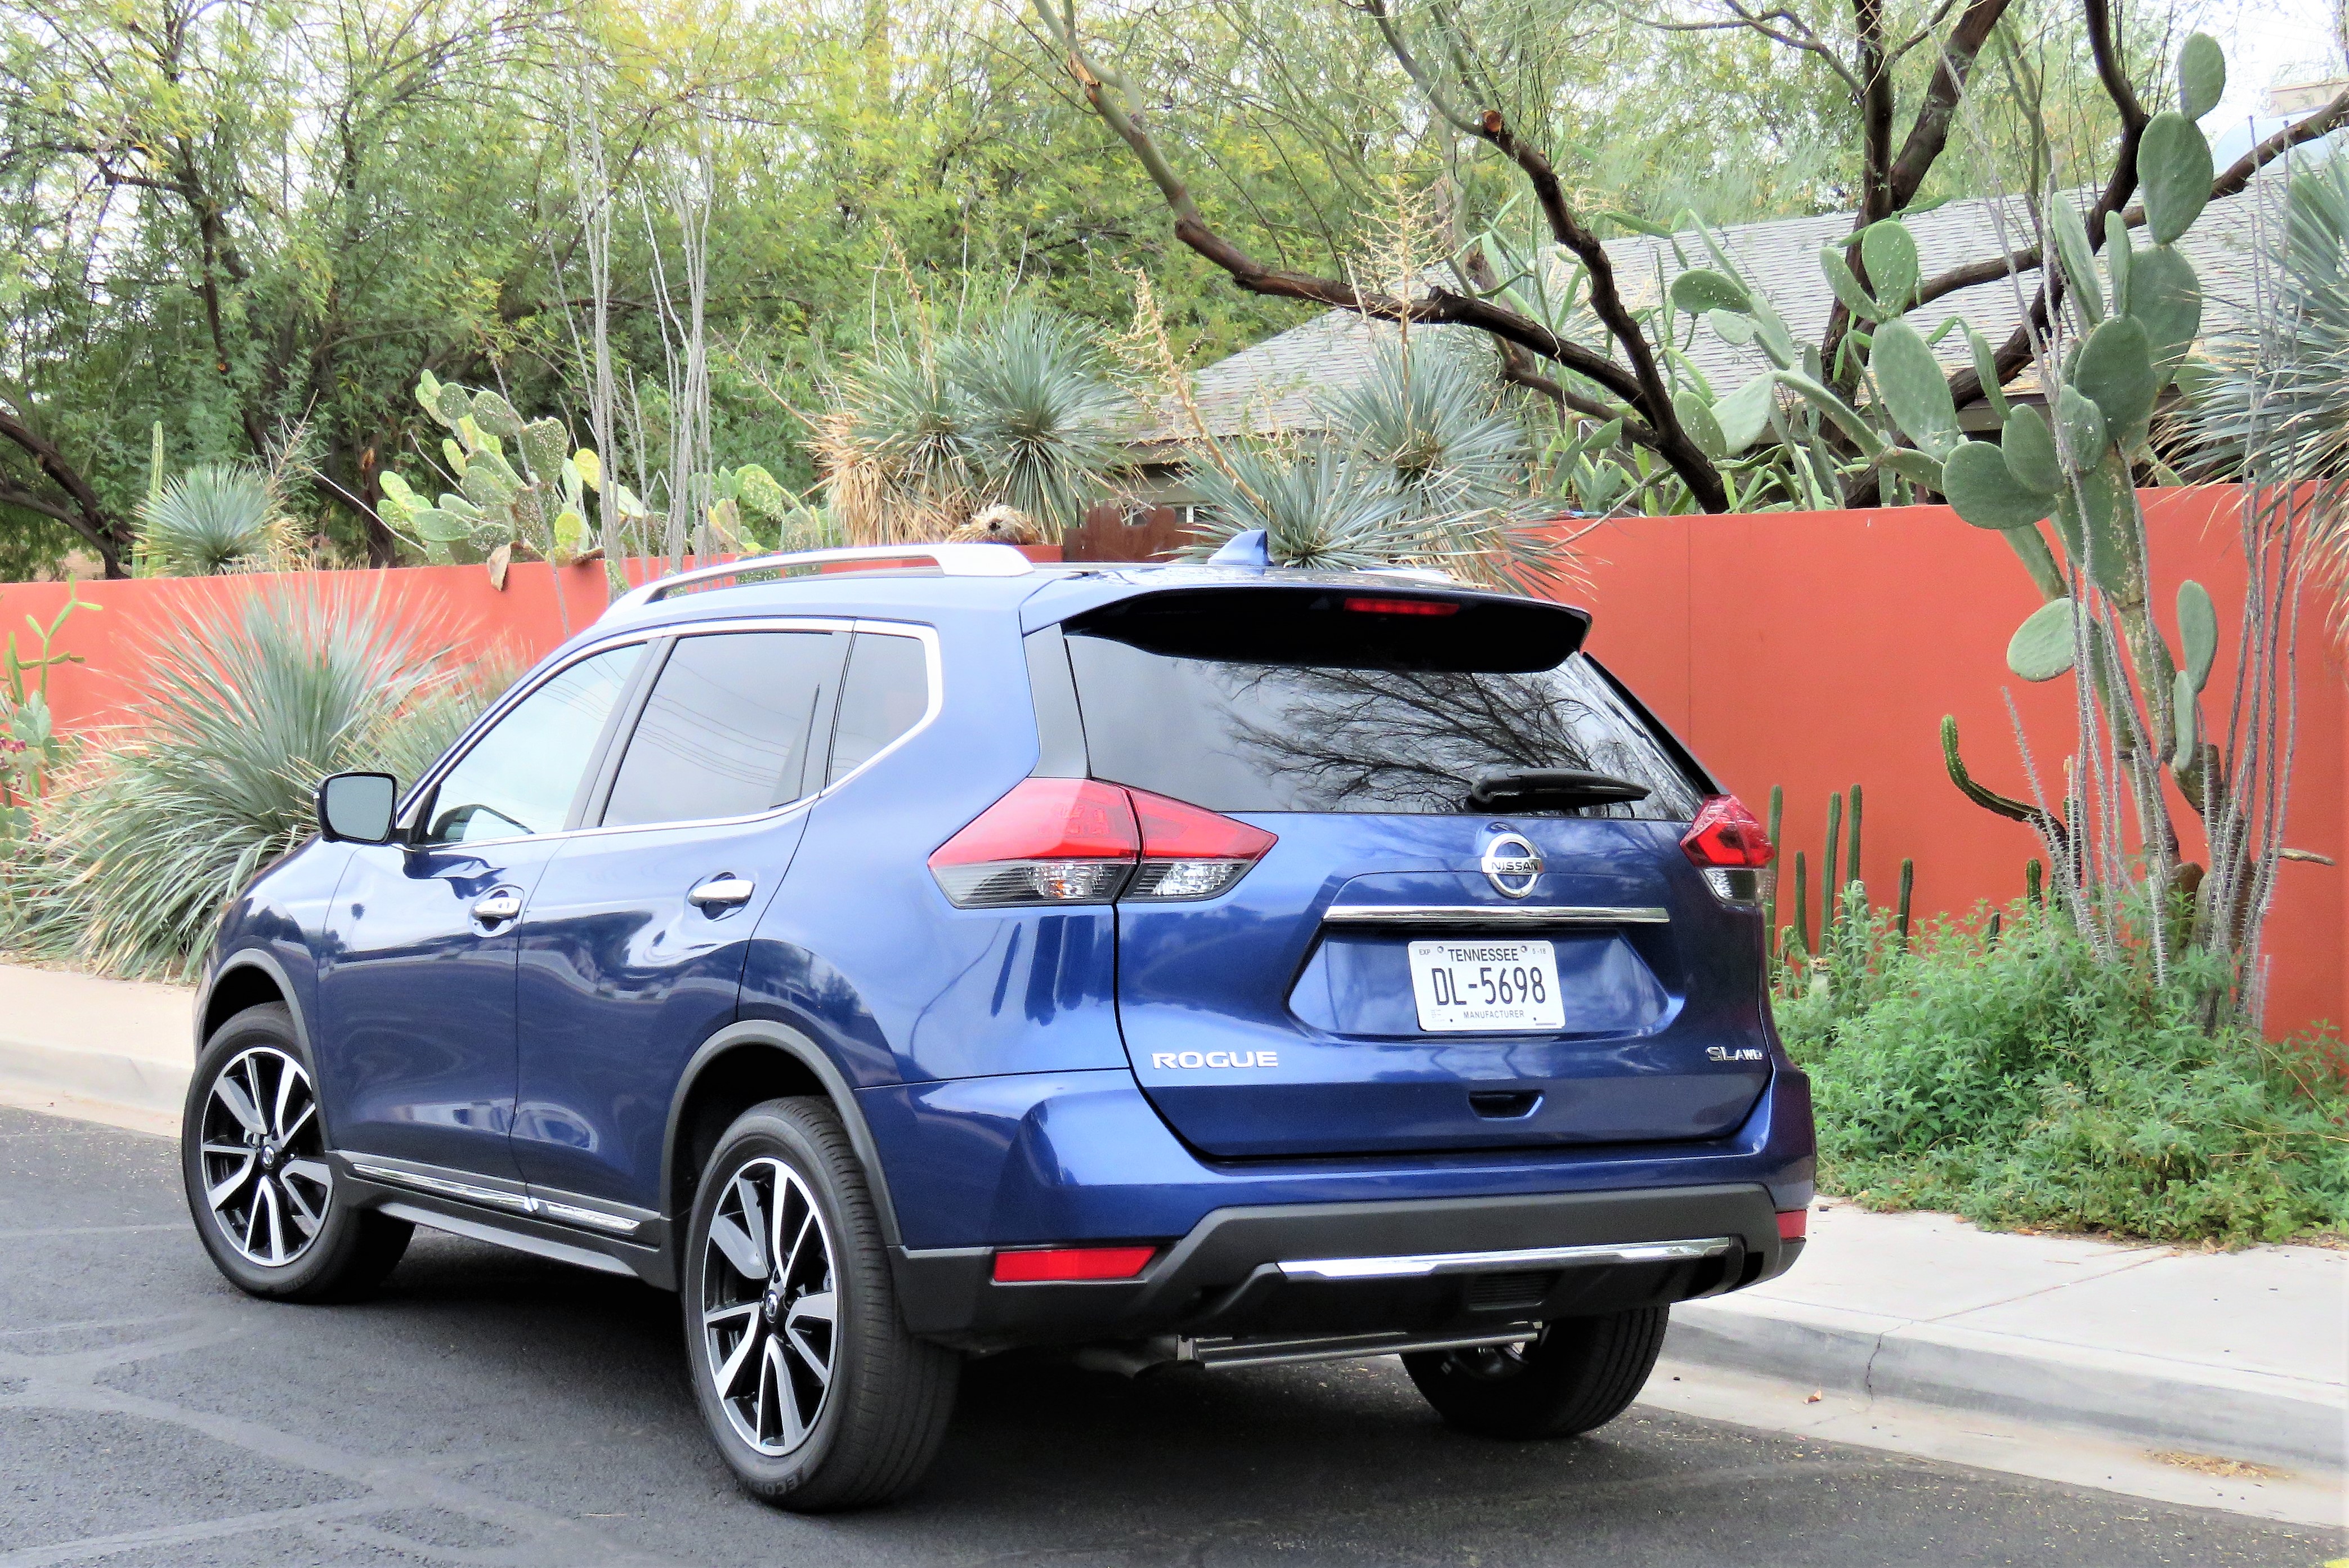 Nissan Rogue, Nissan Rogue tries to drive itself, ClassicCars.com Journal